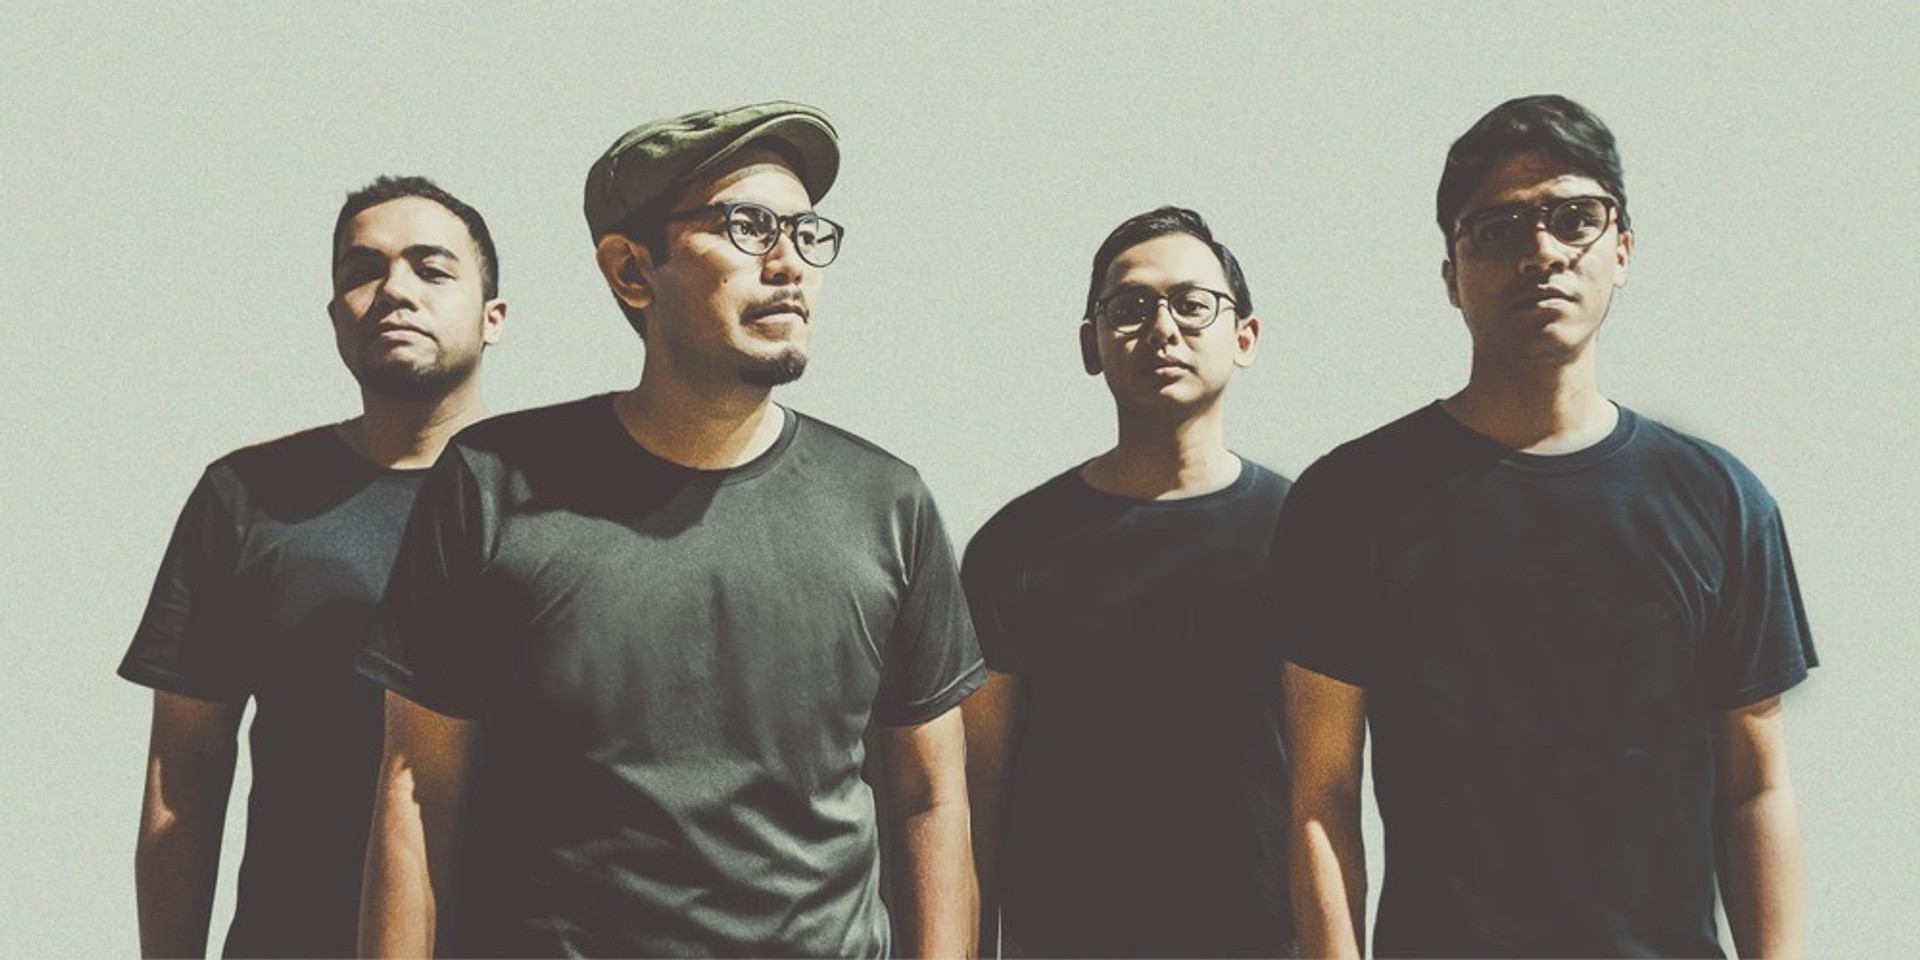 Esplanade kicks off 2017 with a line-up of acts releasing new material